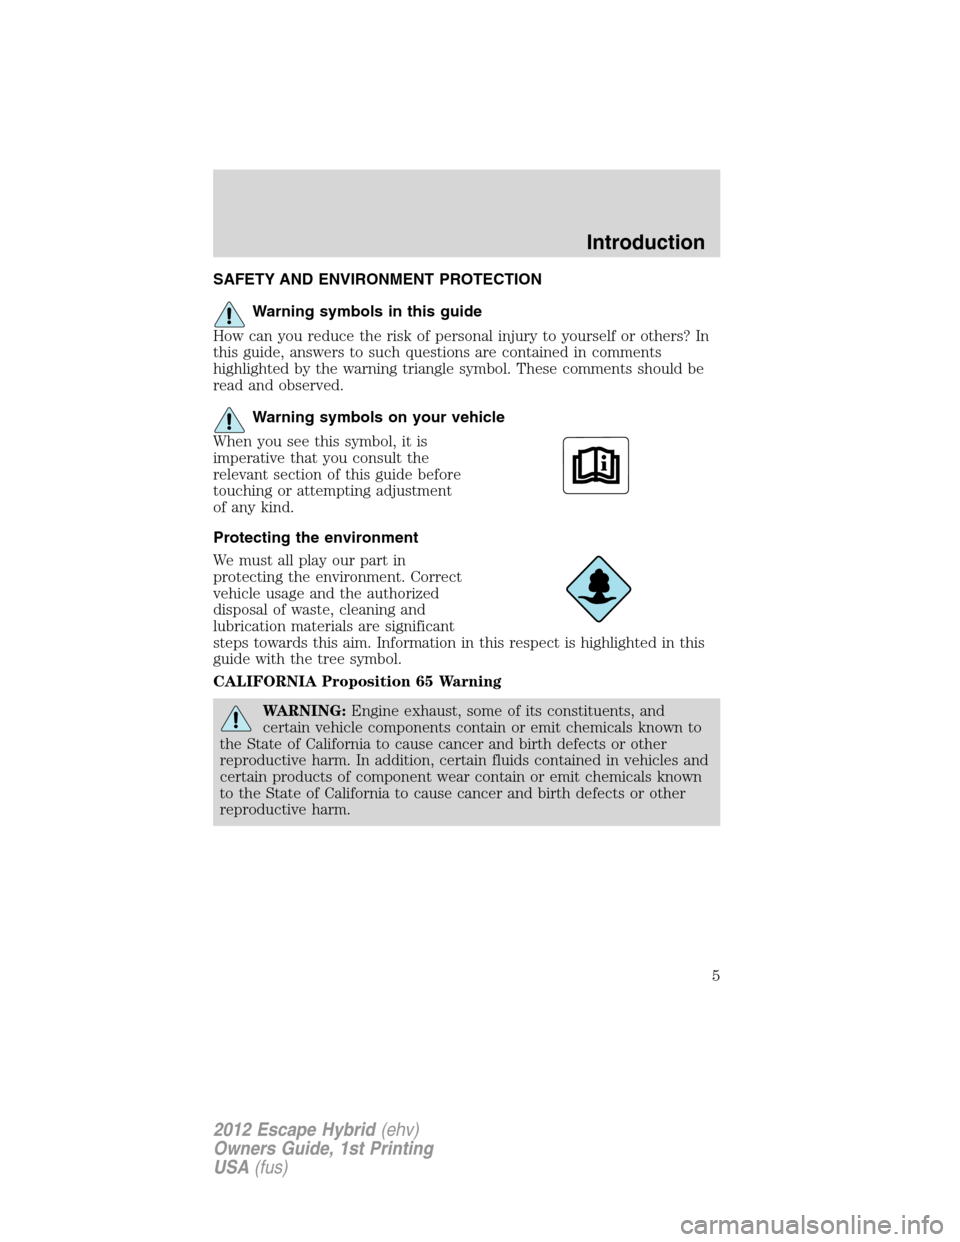 FORD ESCAPE HYBRID 2012 2.G Owners Manual SAFETY AND ENVIRONMENT PROTECTION
Warning symbols in this guide
How can you reduce the risk of personal injury to yourself or others? In
this guide, answers to such questions are contained in comments